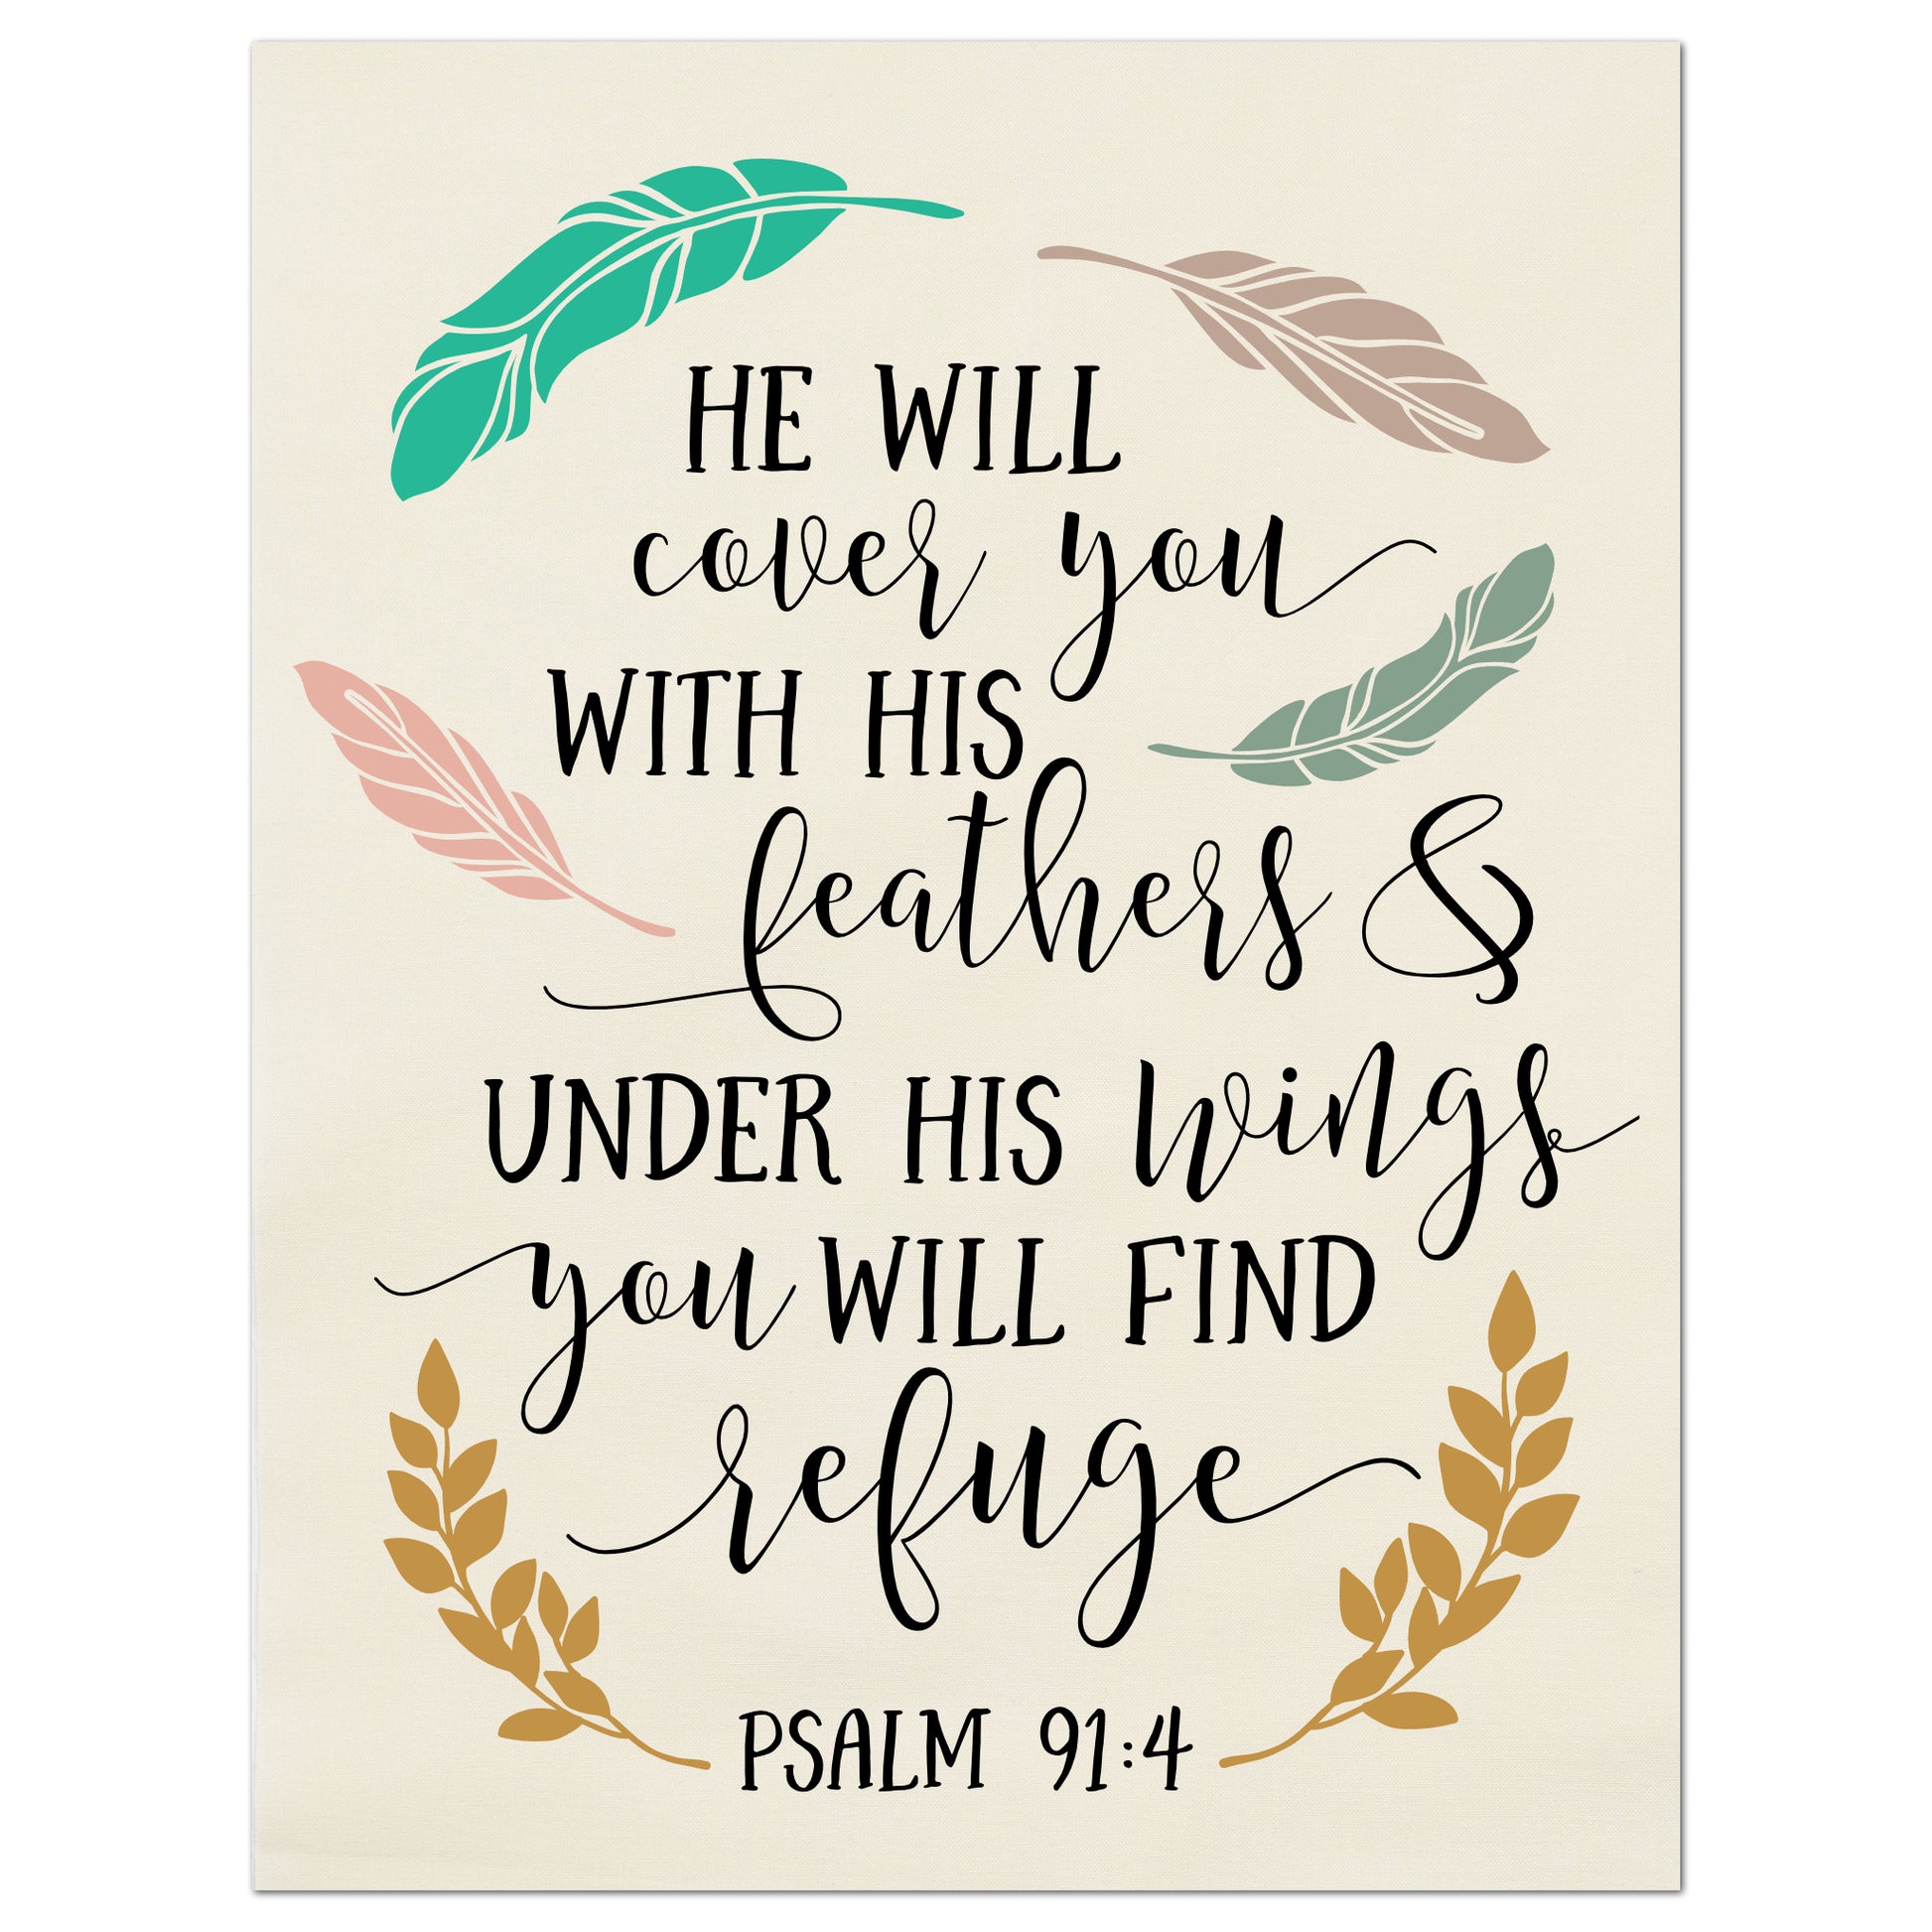 He will cover you with His feathers and under His wings you will find refuge - Psalm 91:4 - Fabric Panel Print, Quilt Block, Scripture Fabric 